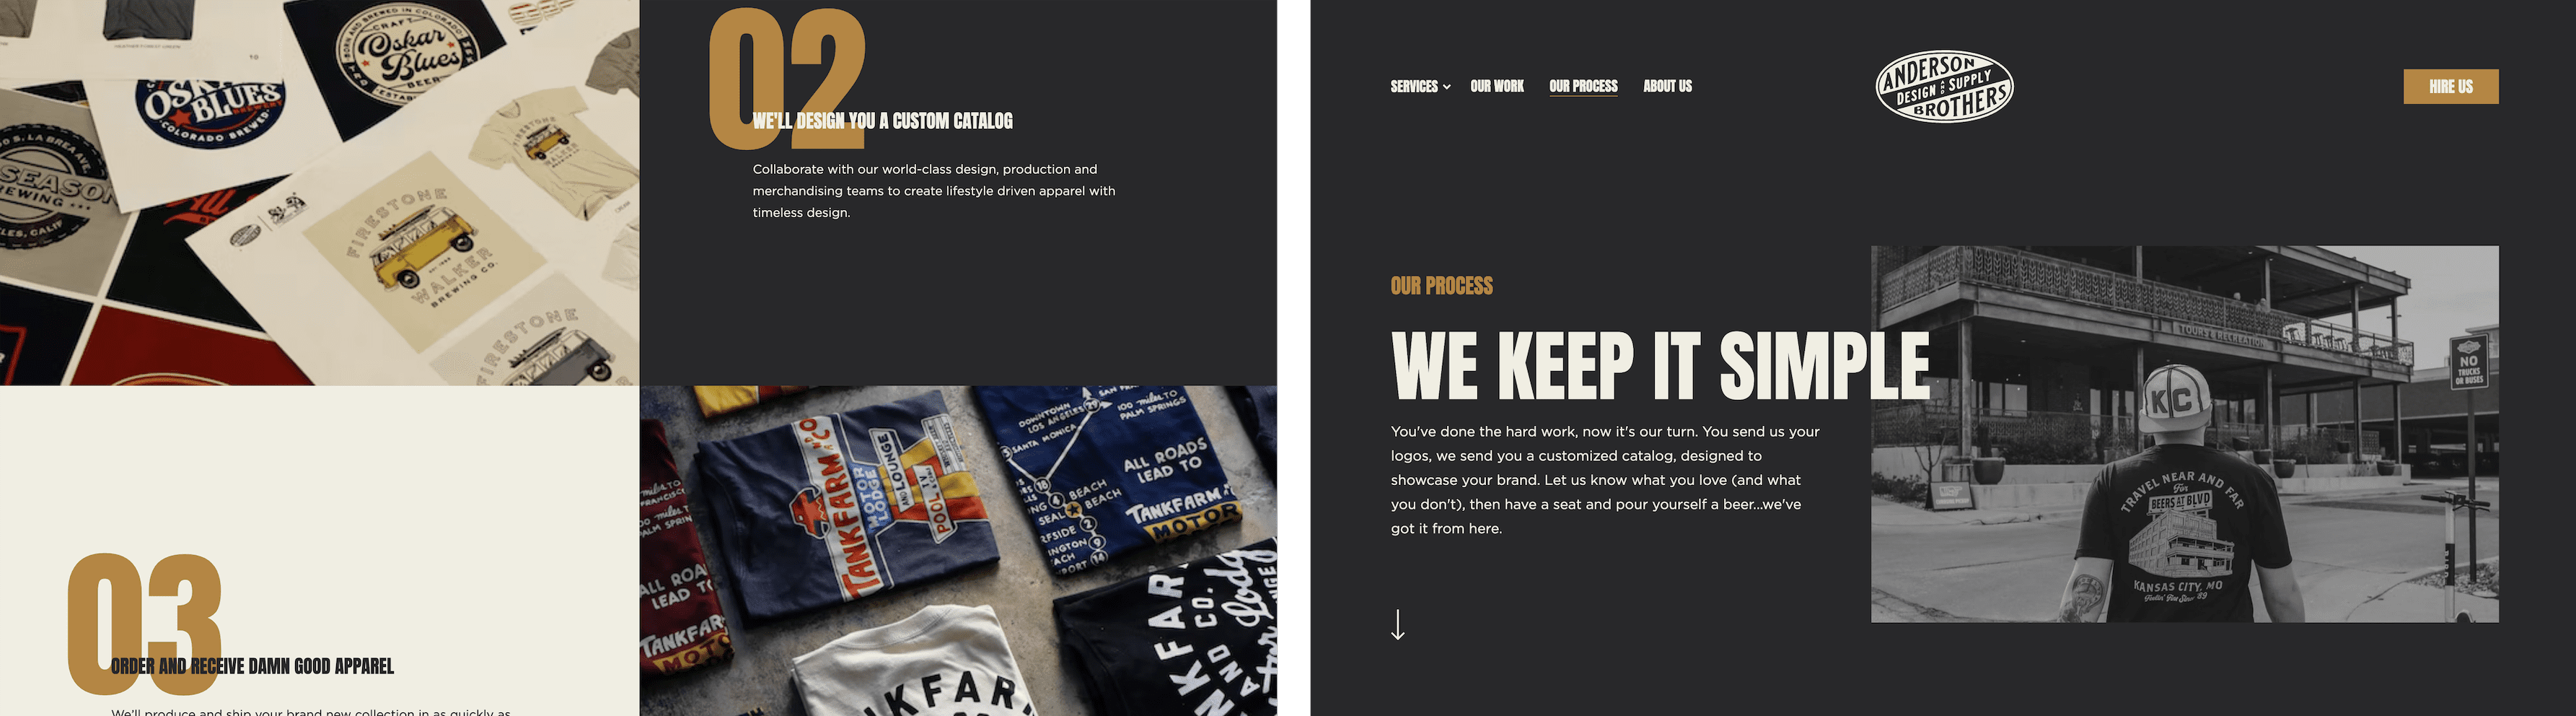 Screenshots of Anderson Supply website showing text overlapping images and large numbered typography